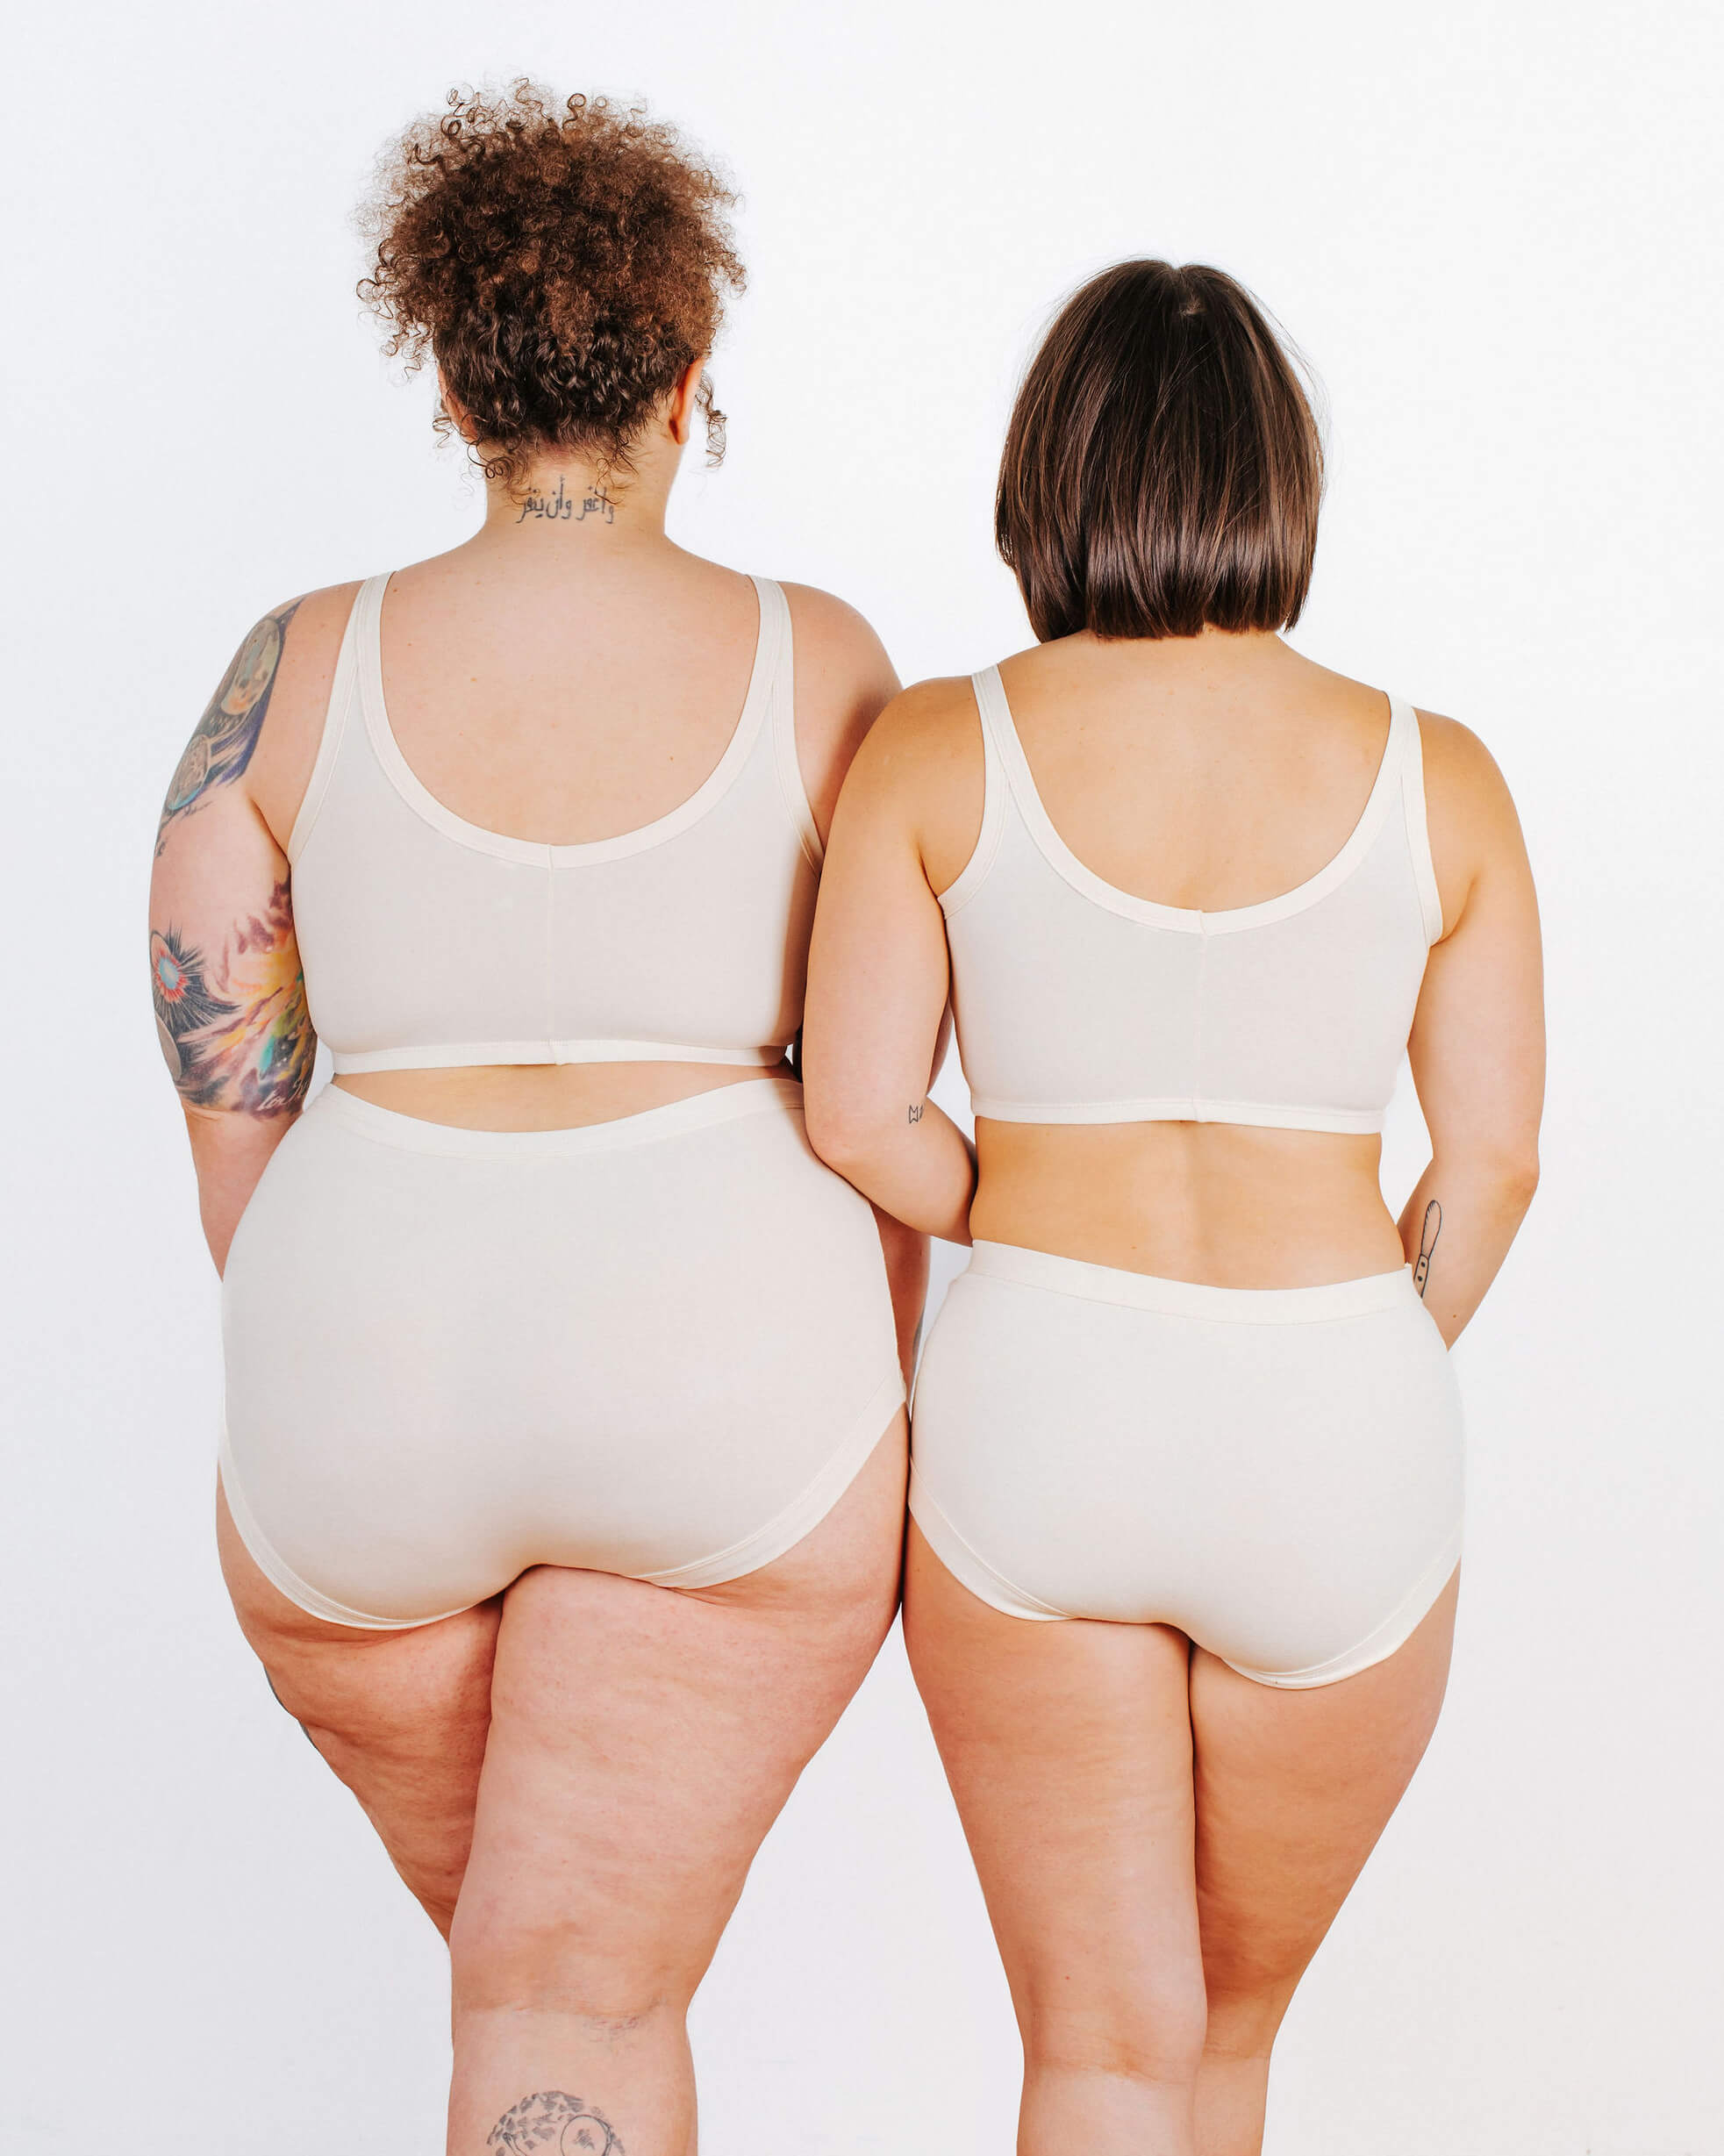 Fit photo from the back of Thunderpants organic cotton Longline Bra and Original style underwear on two models. 